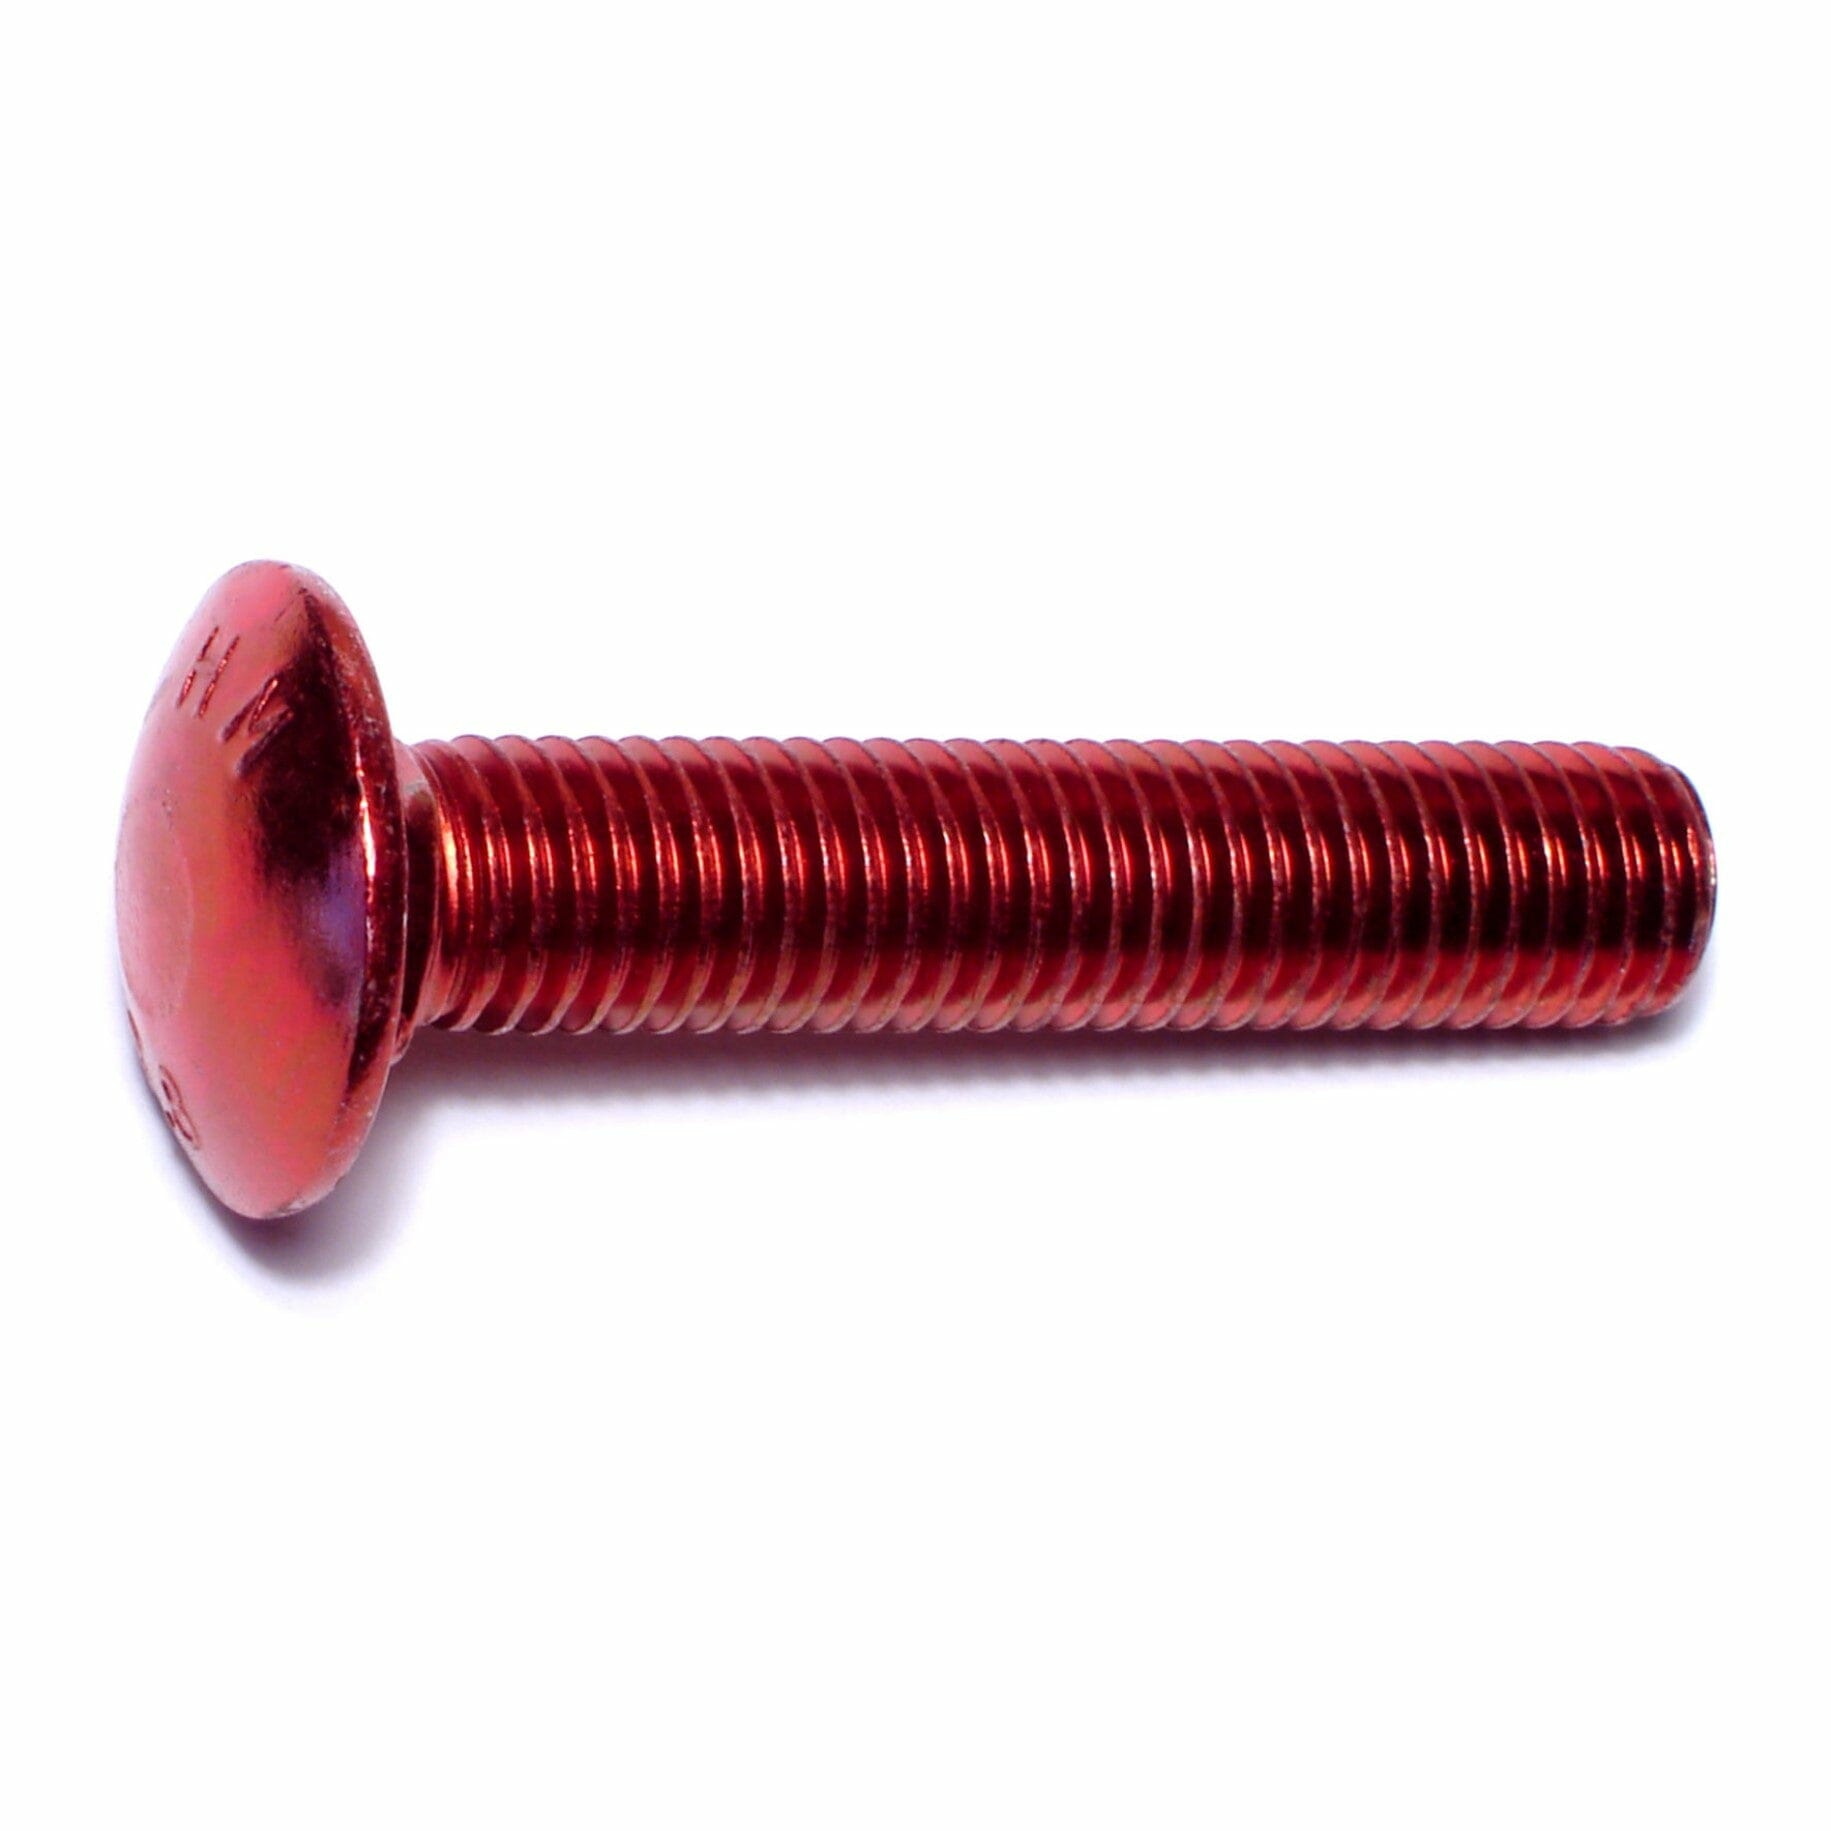 Fasteners, Bolts,12mm-1.75mm x 60mm, Carriage Bolts